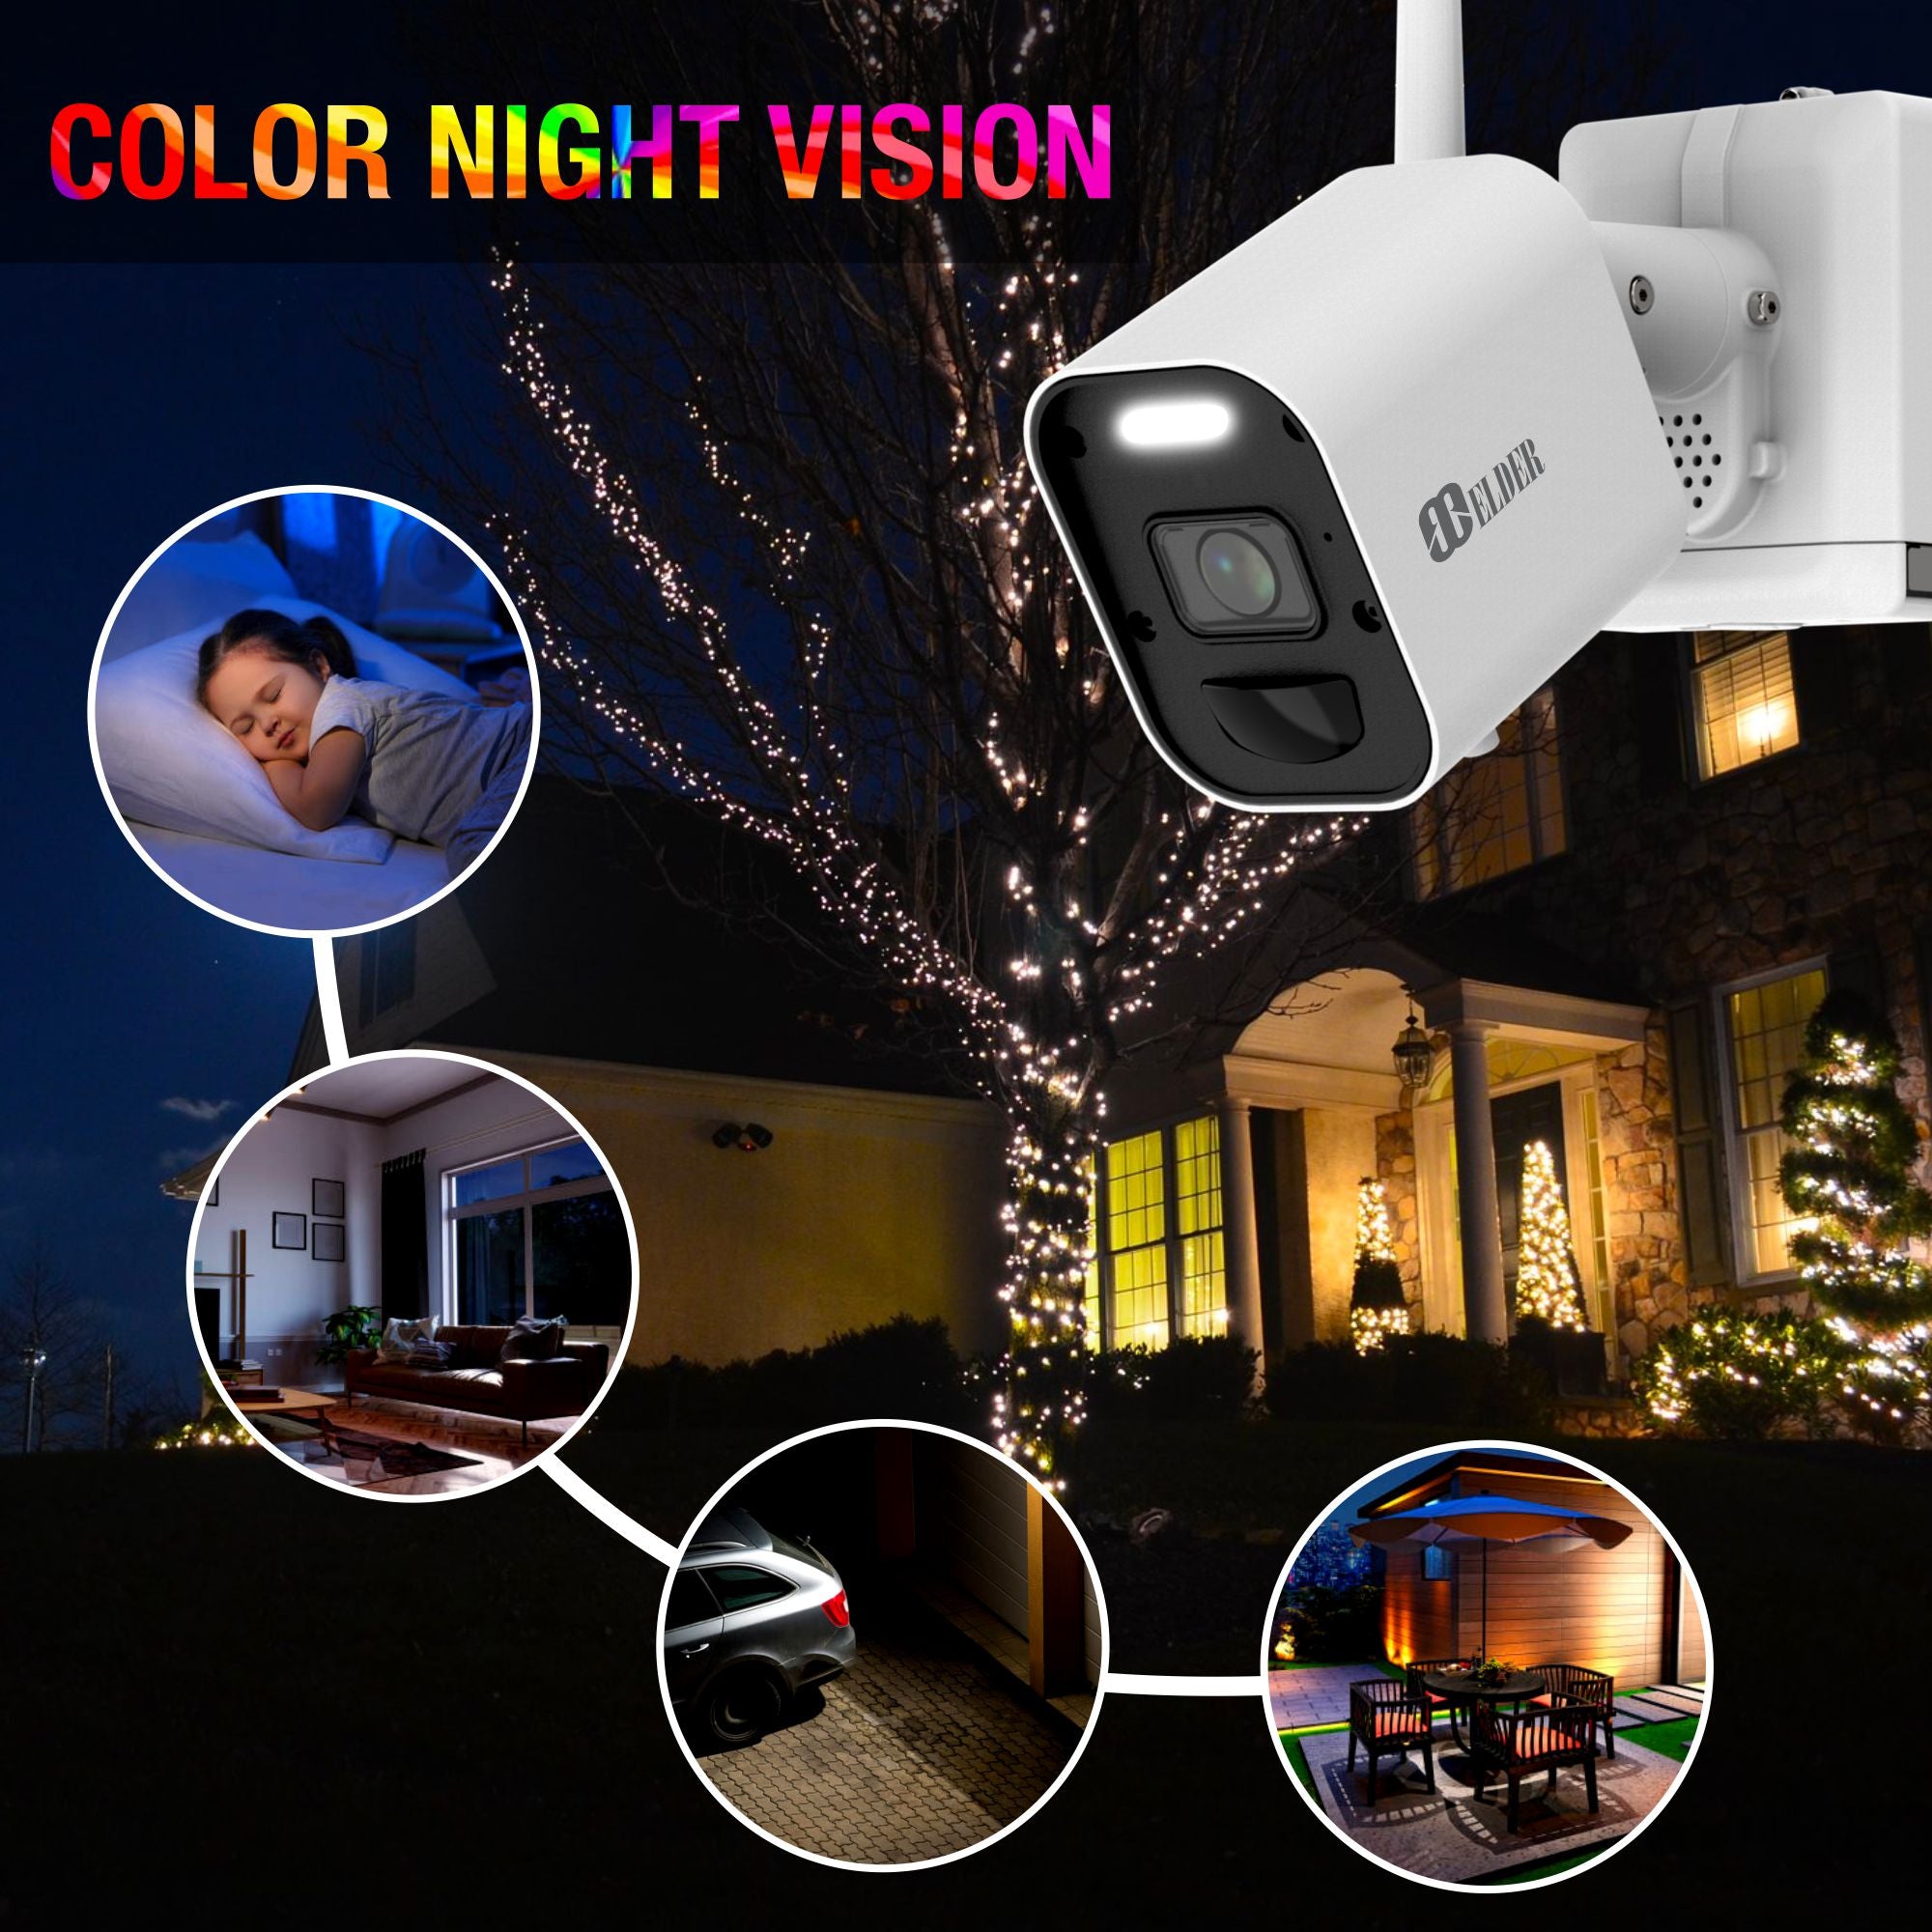 Wireless Surveillance Camera with Color Night Vision